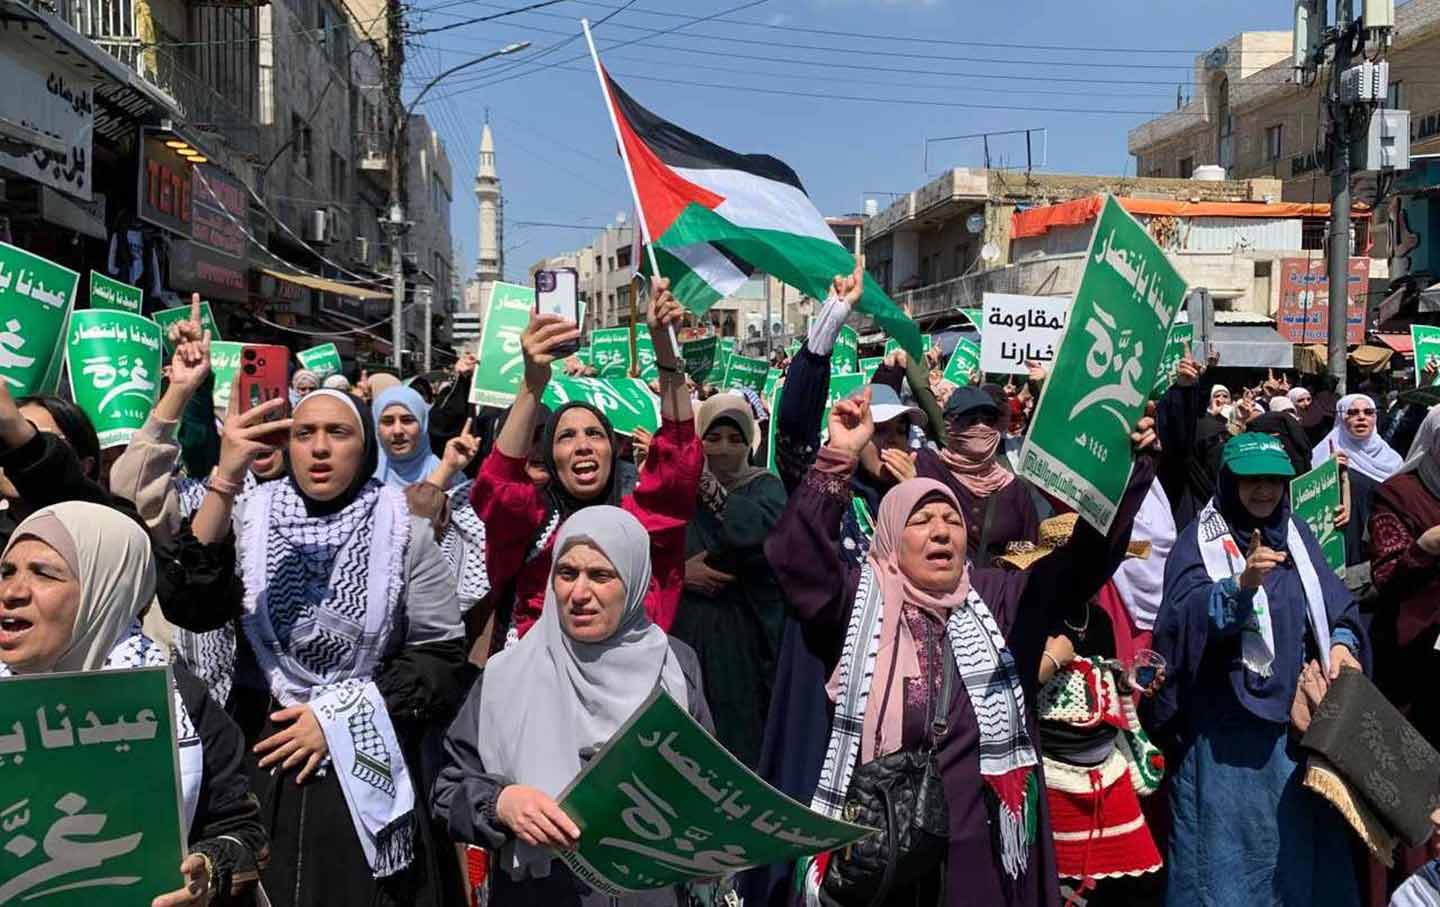 Demonstration held in Jordan to show solidarity with Palestinians in Gaza.